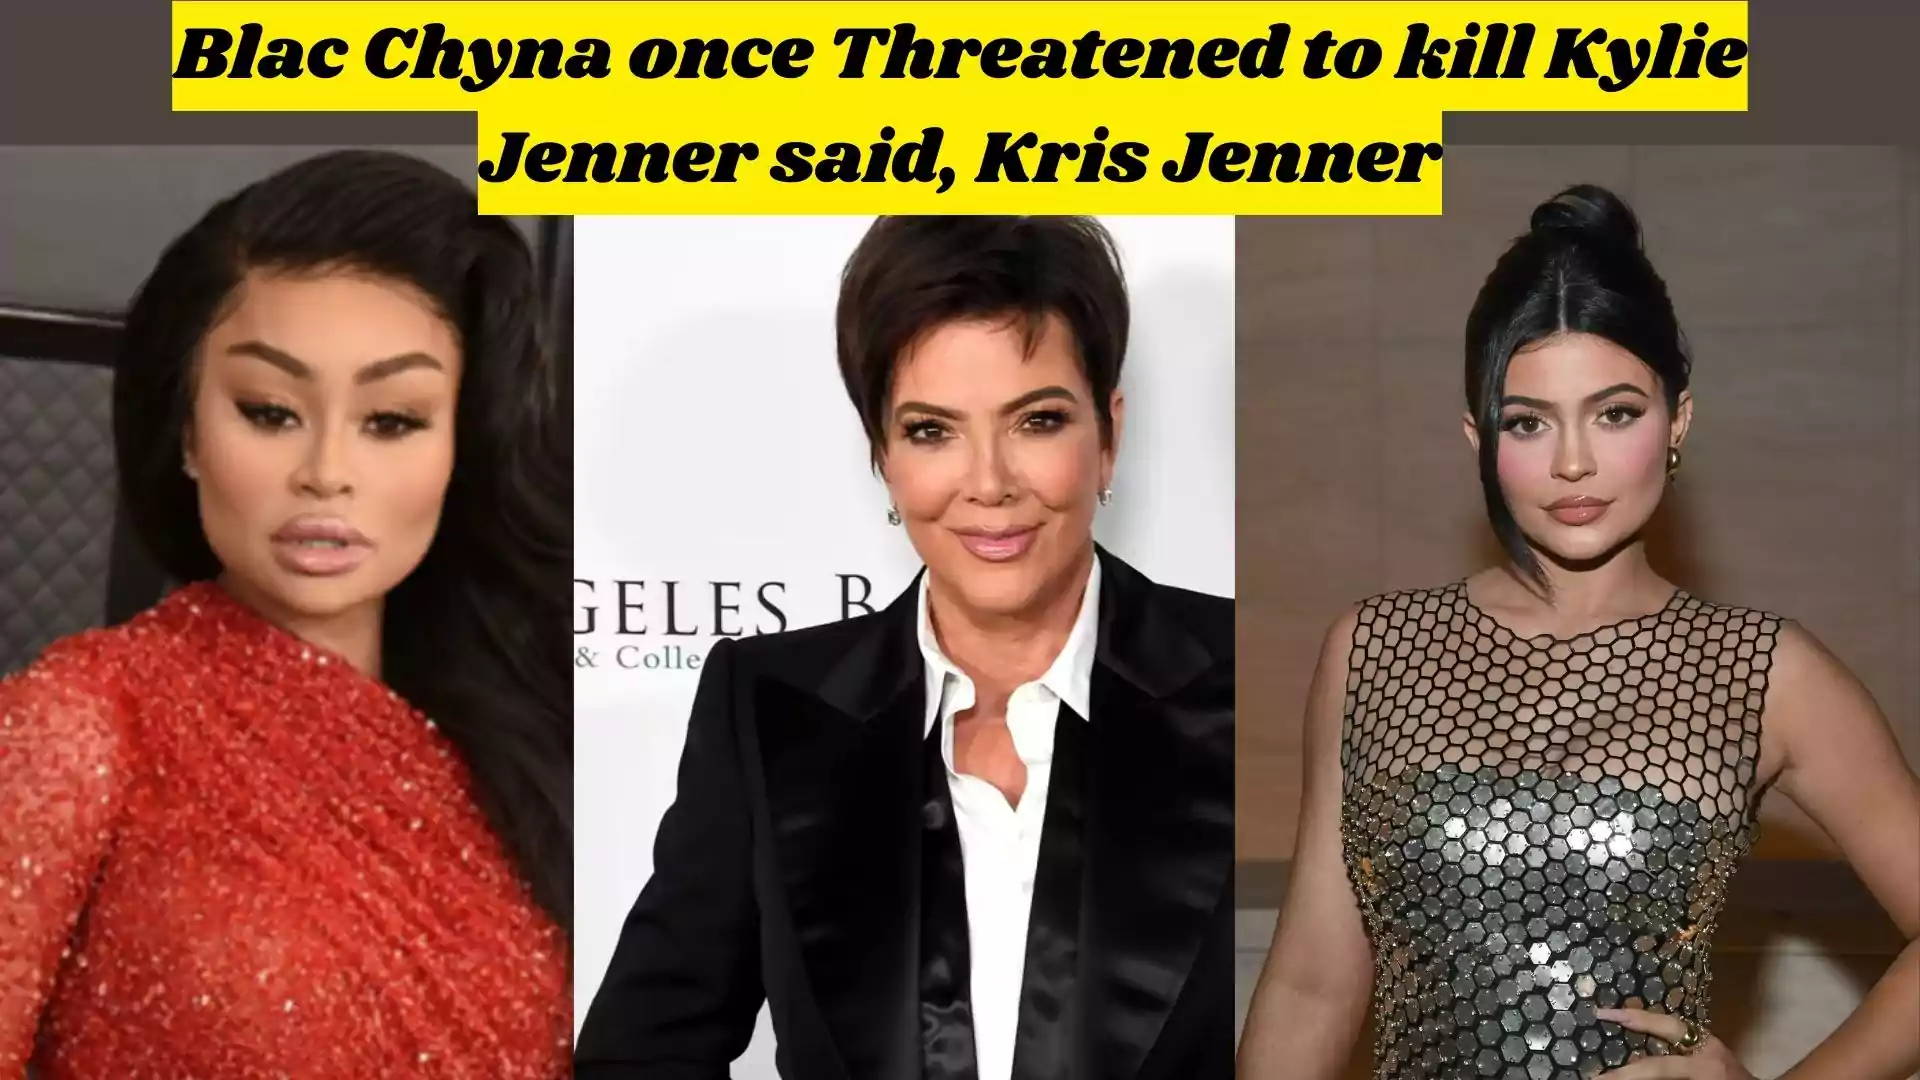 Blac Chyna once Threatened to kill Kylie Jenner said, Kris Jenner wallpaper and images